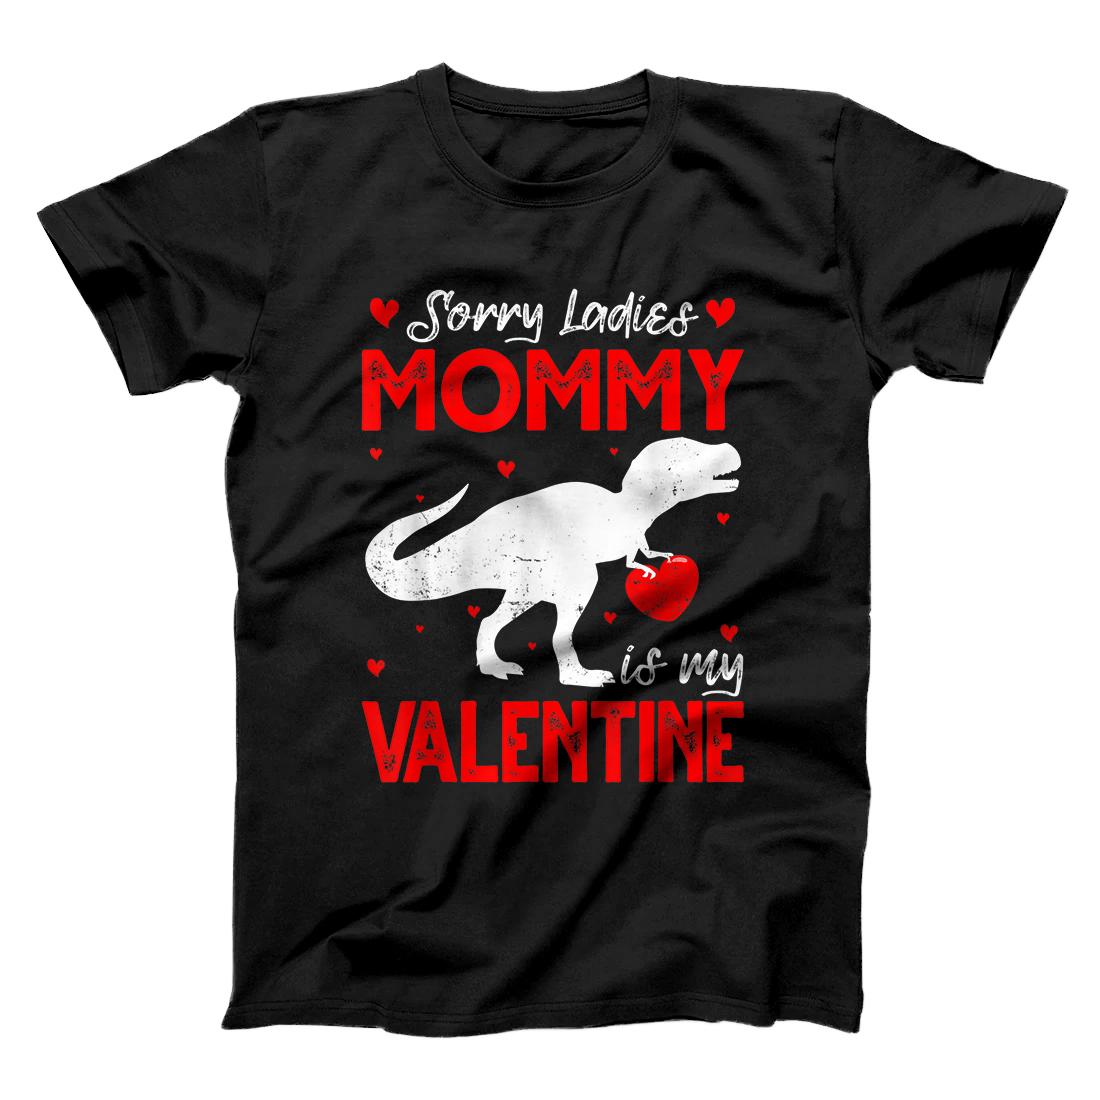 Personalized Sorry Ladies Mommy Is My Valentine Tee Boys Valentine's Day T-Shirt